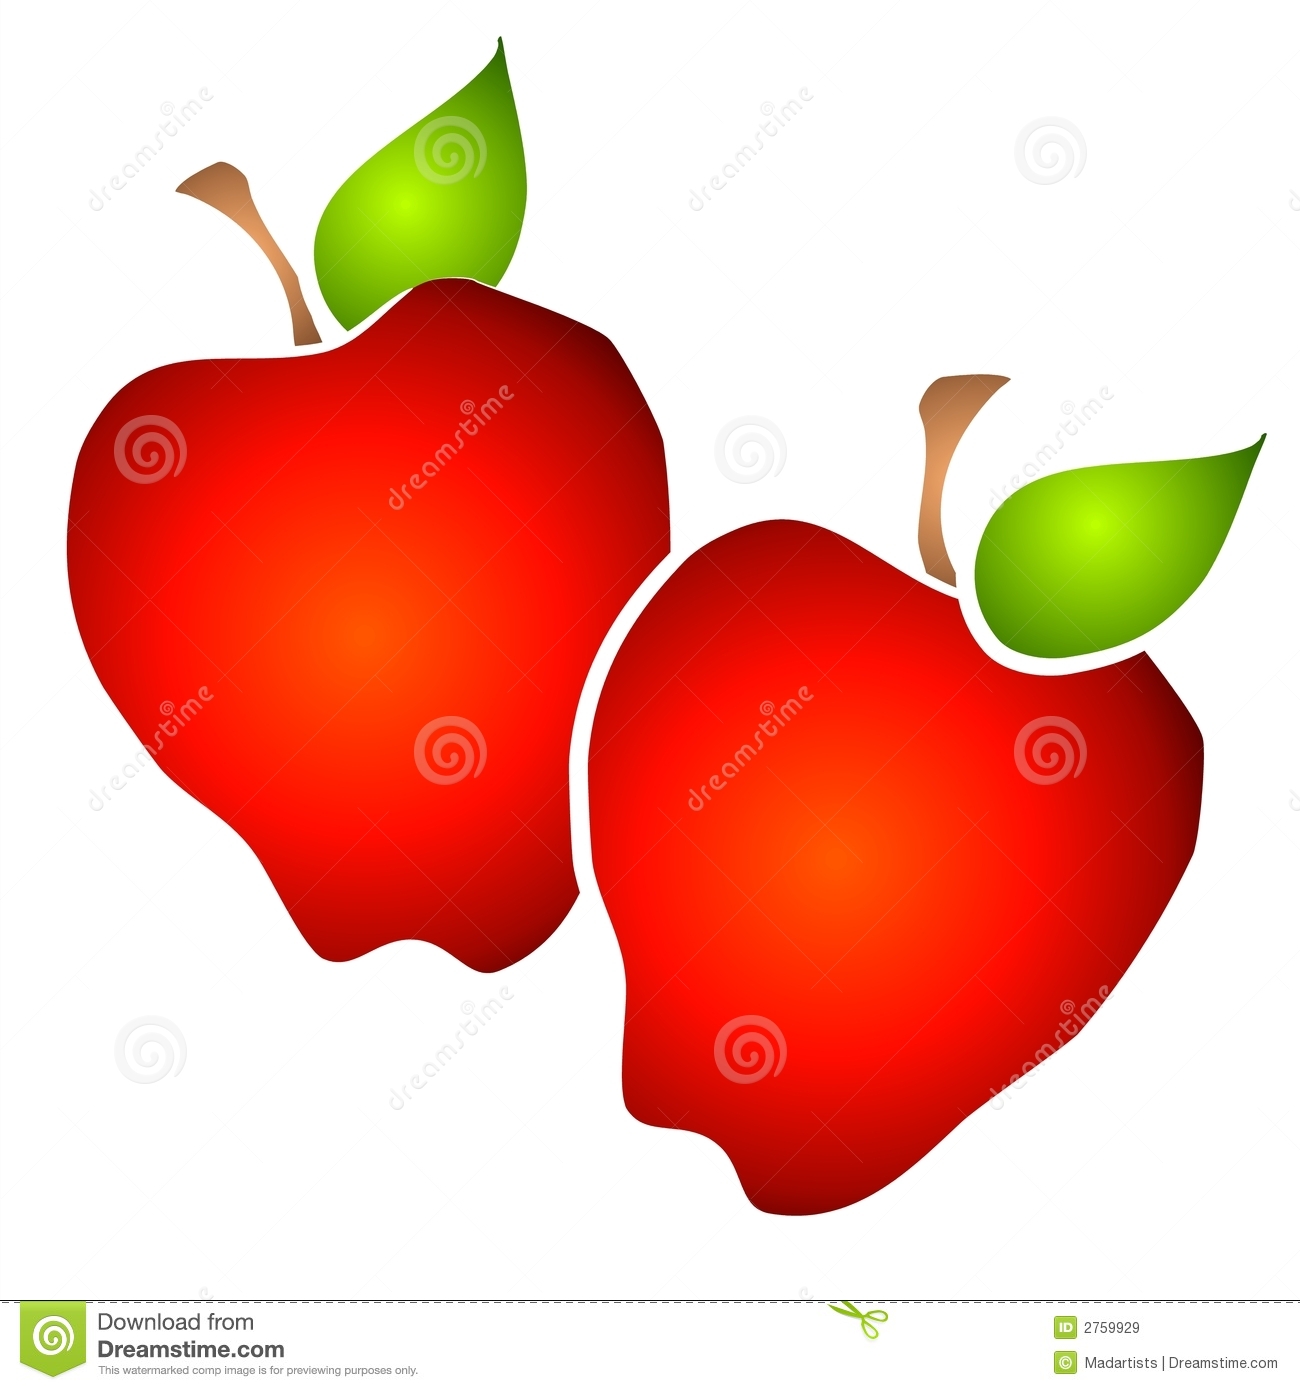 Pair of big red apples clipart royalty free stock images image